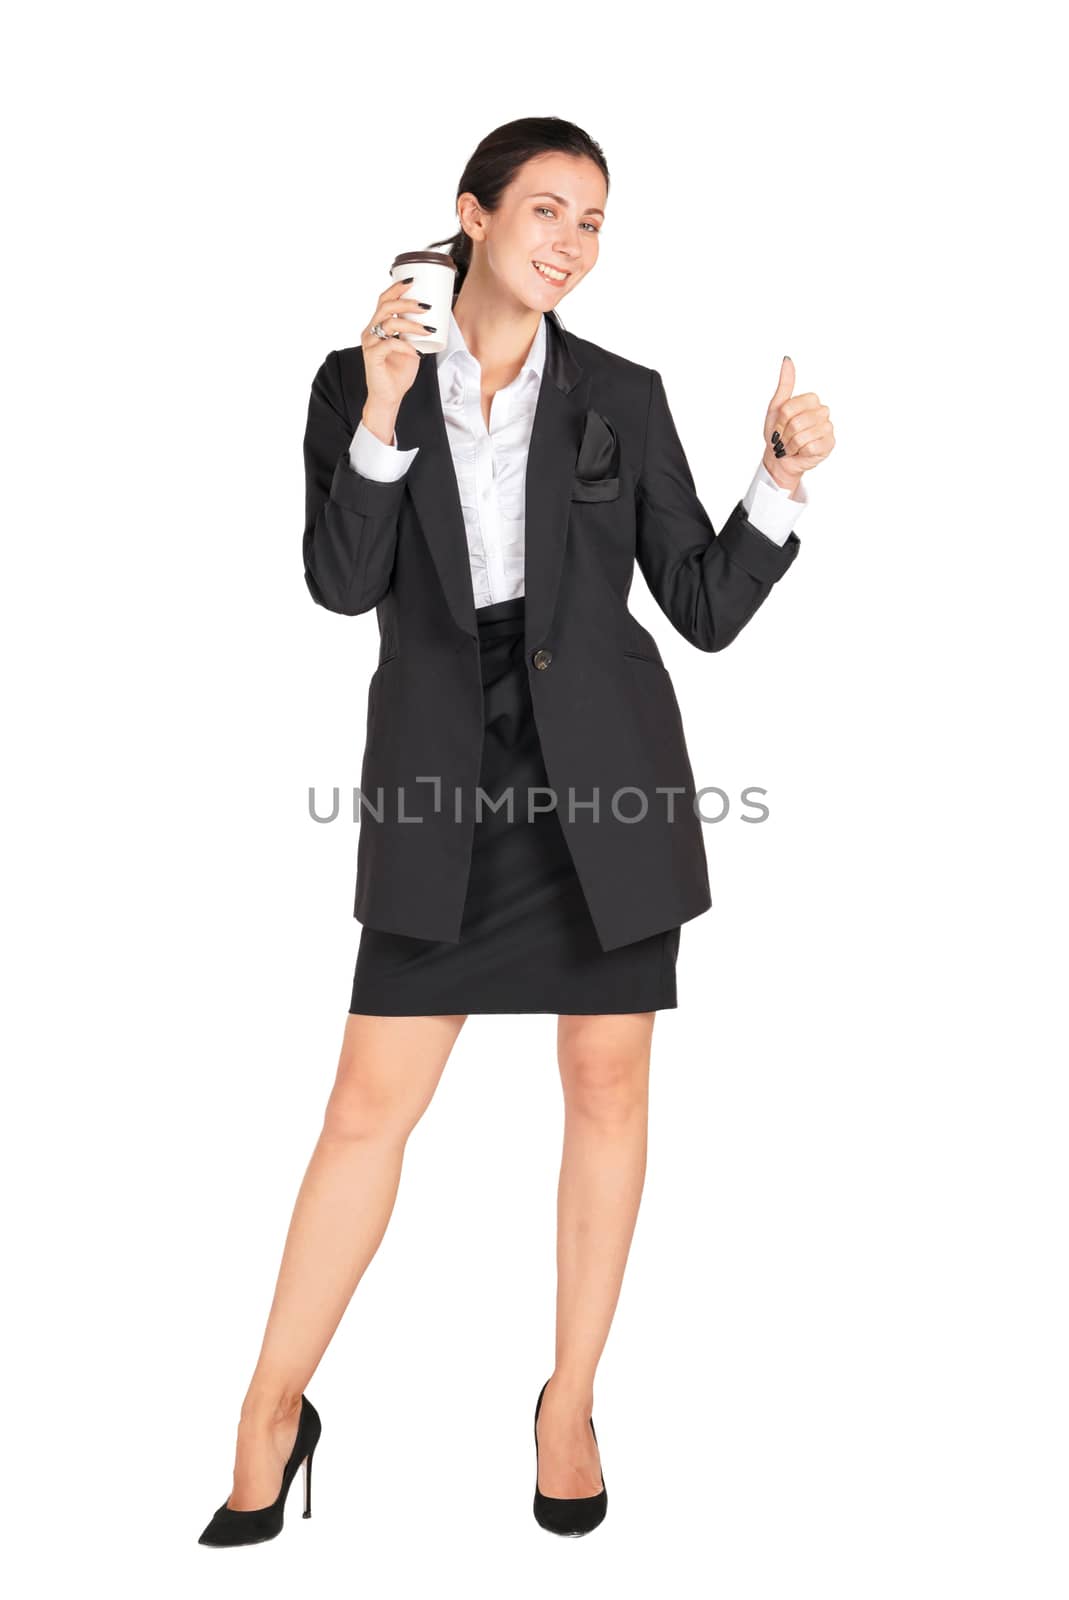 Young women in black suit with a smile holding a cup of coffee. Portrait on white background with studio light.